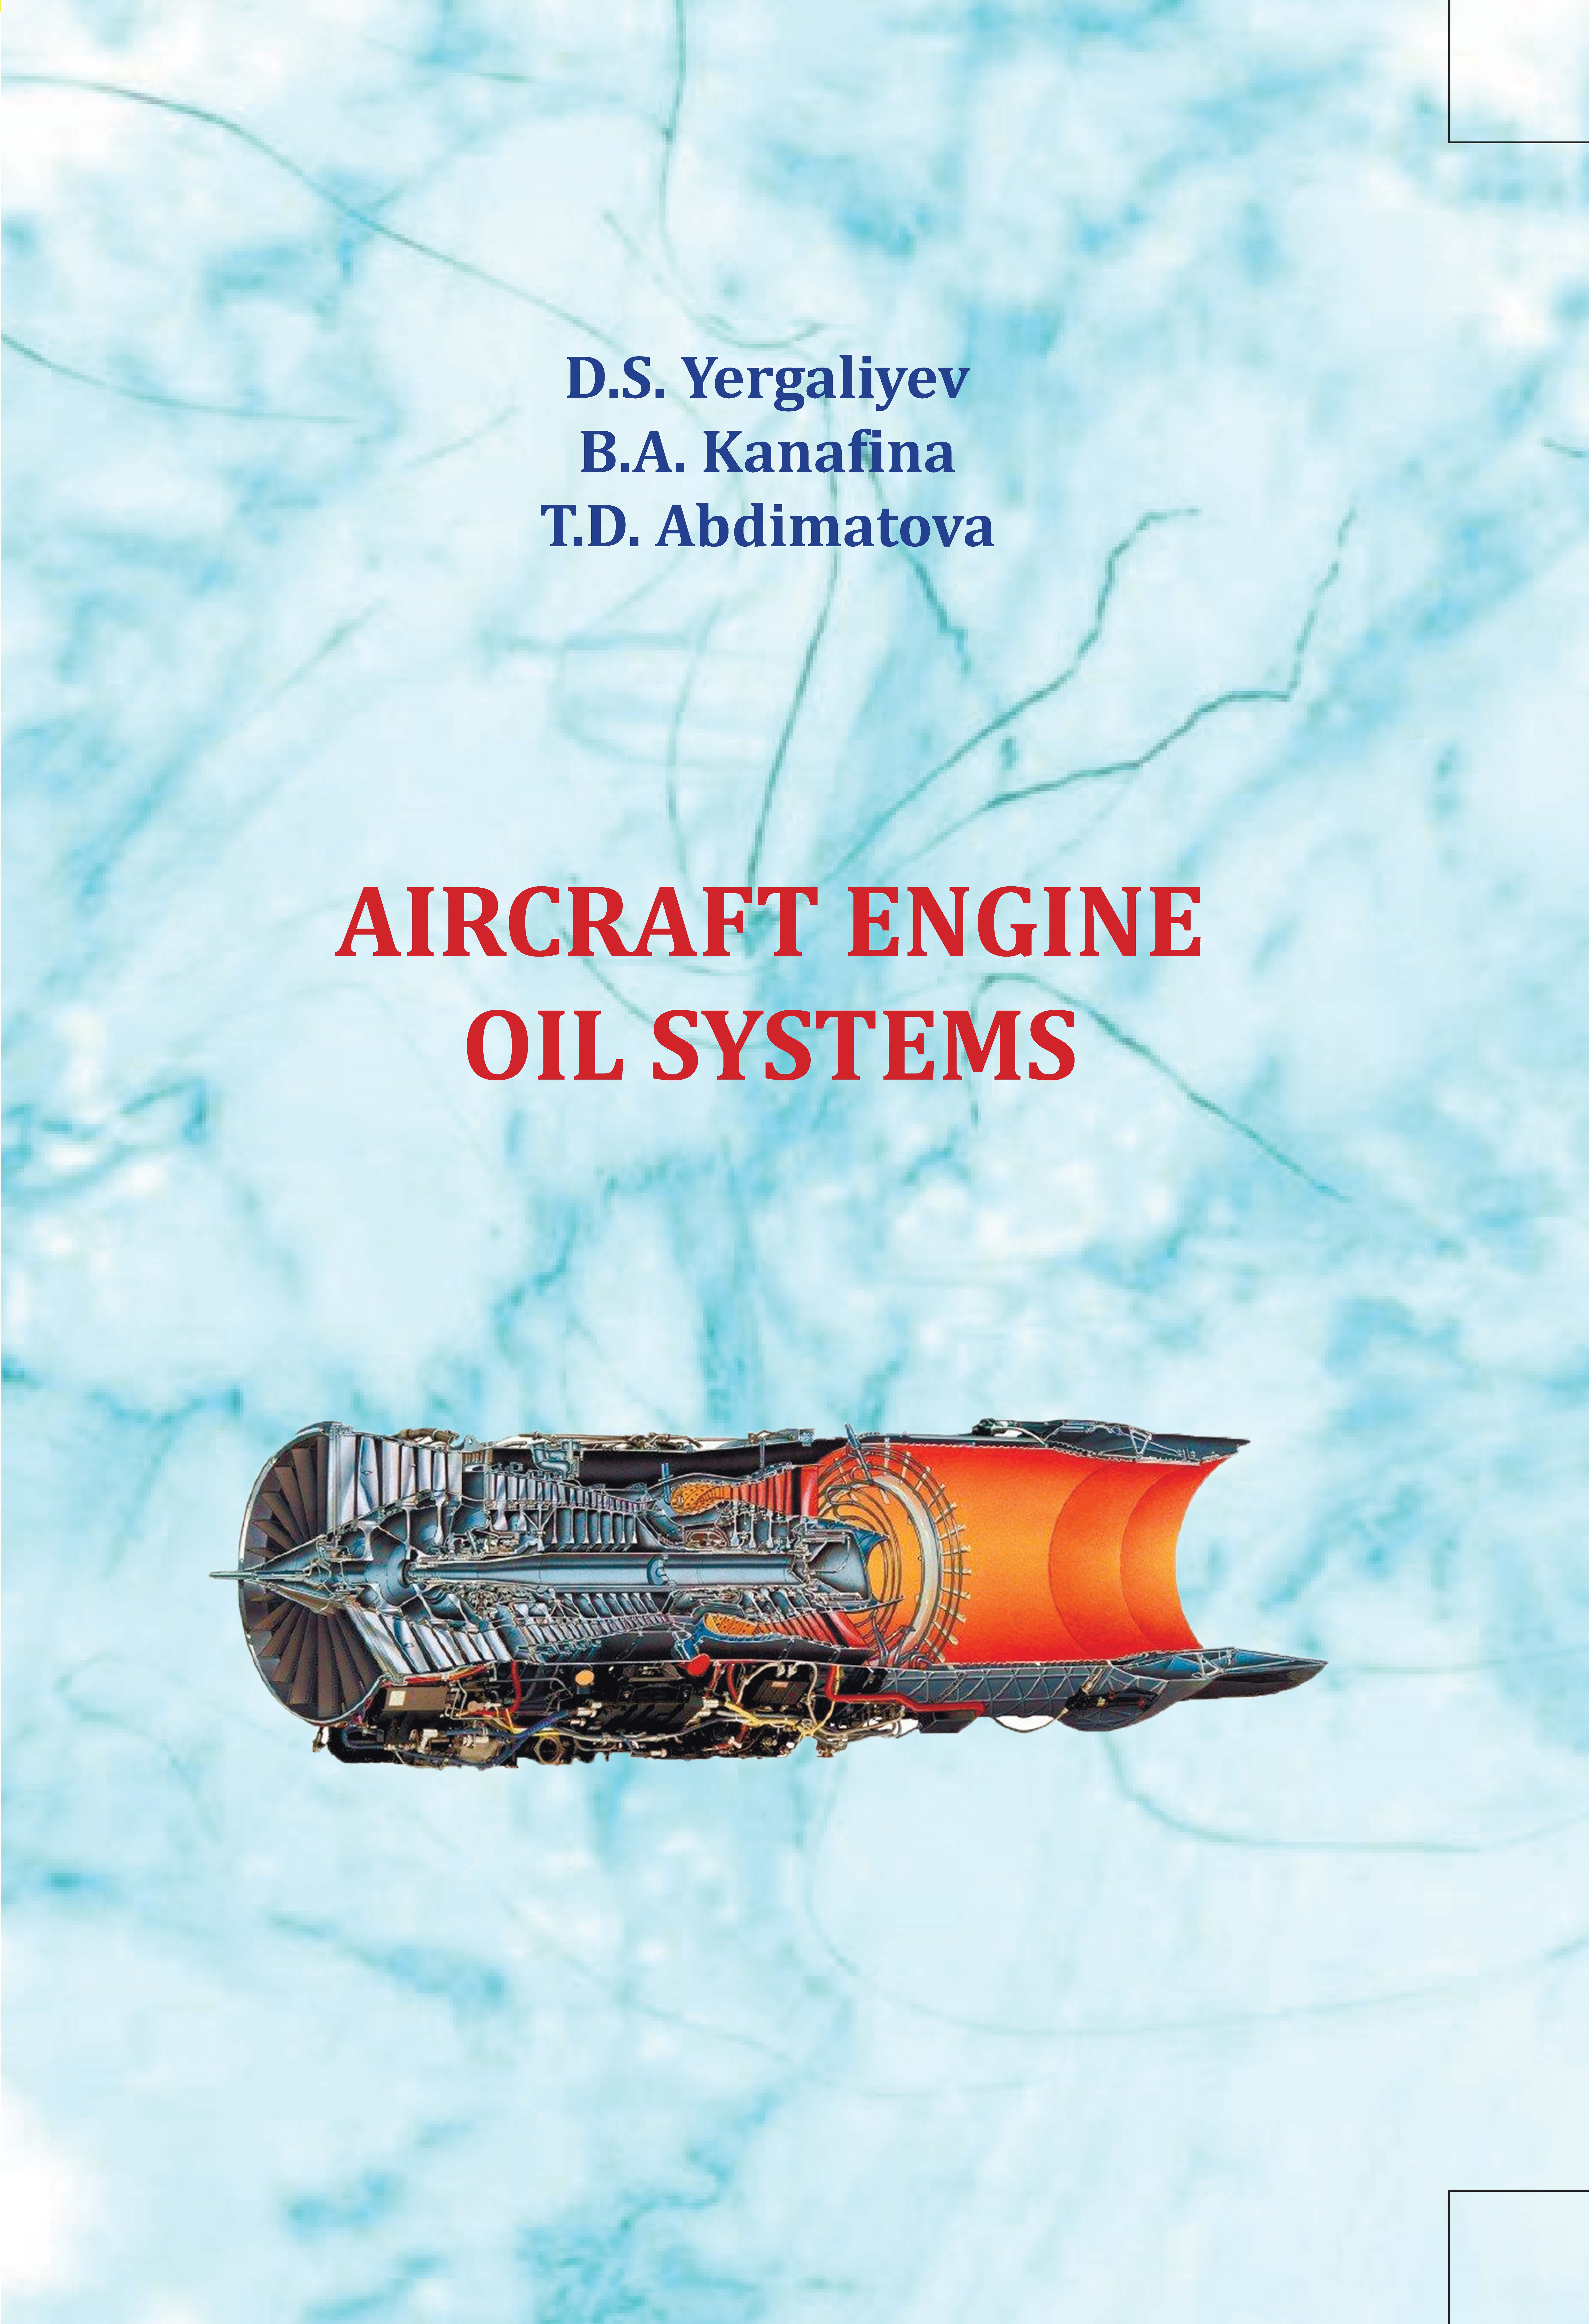 Aircraft Engine Oil Systems: The textbook